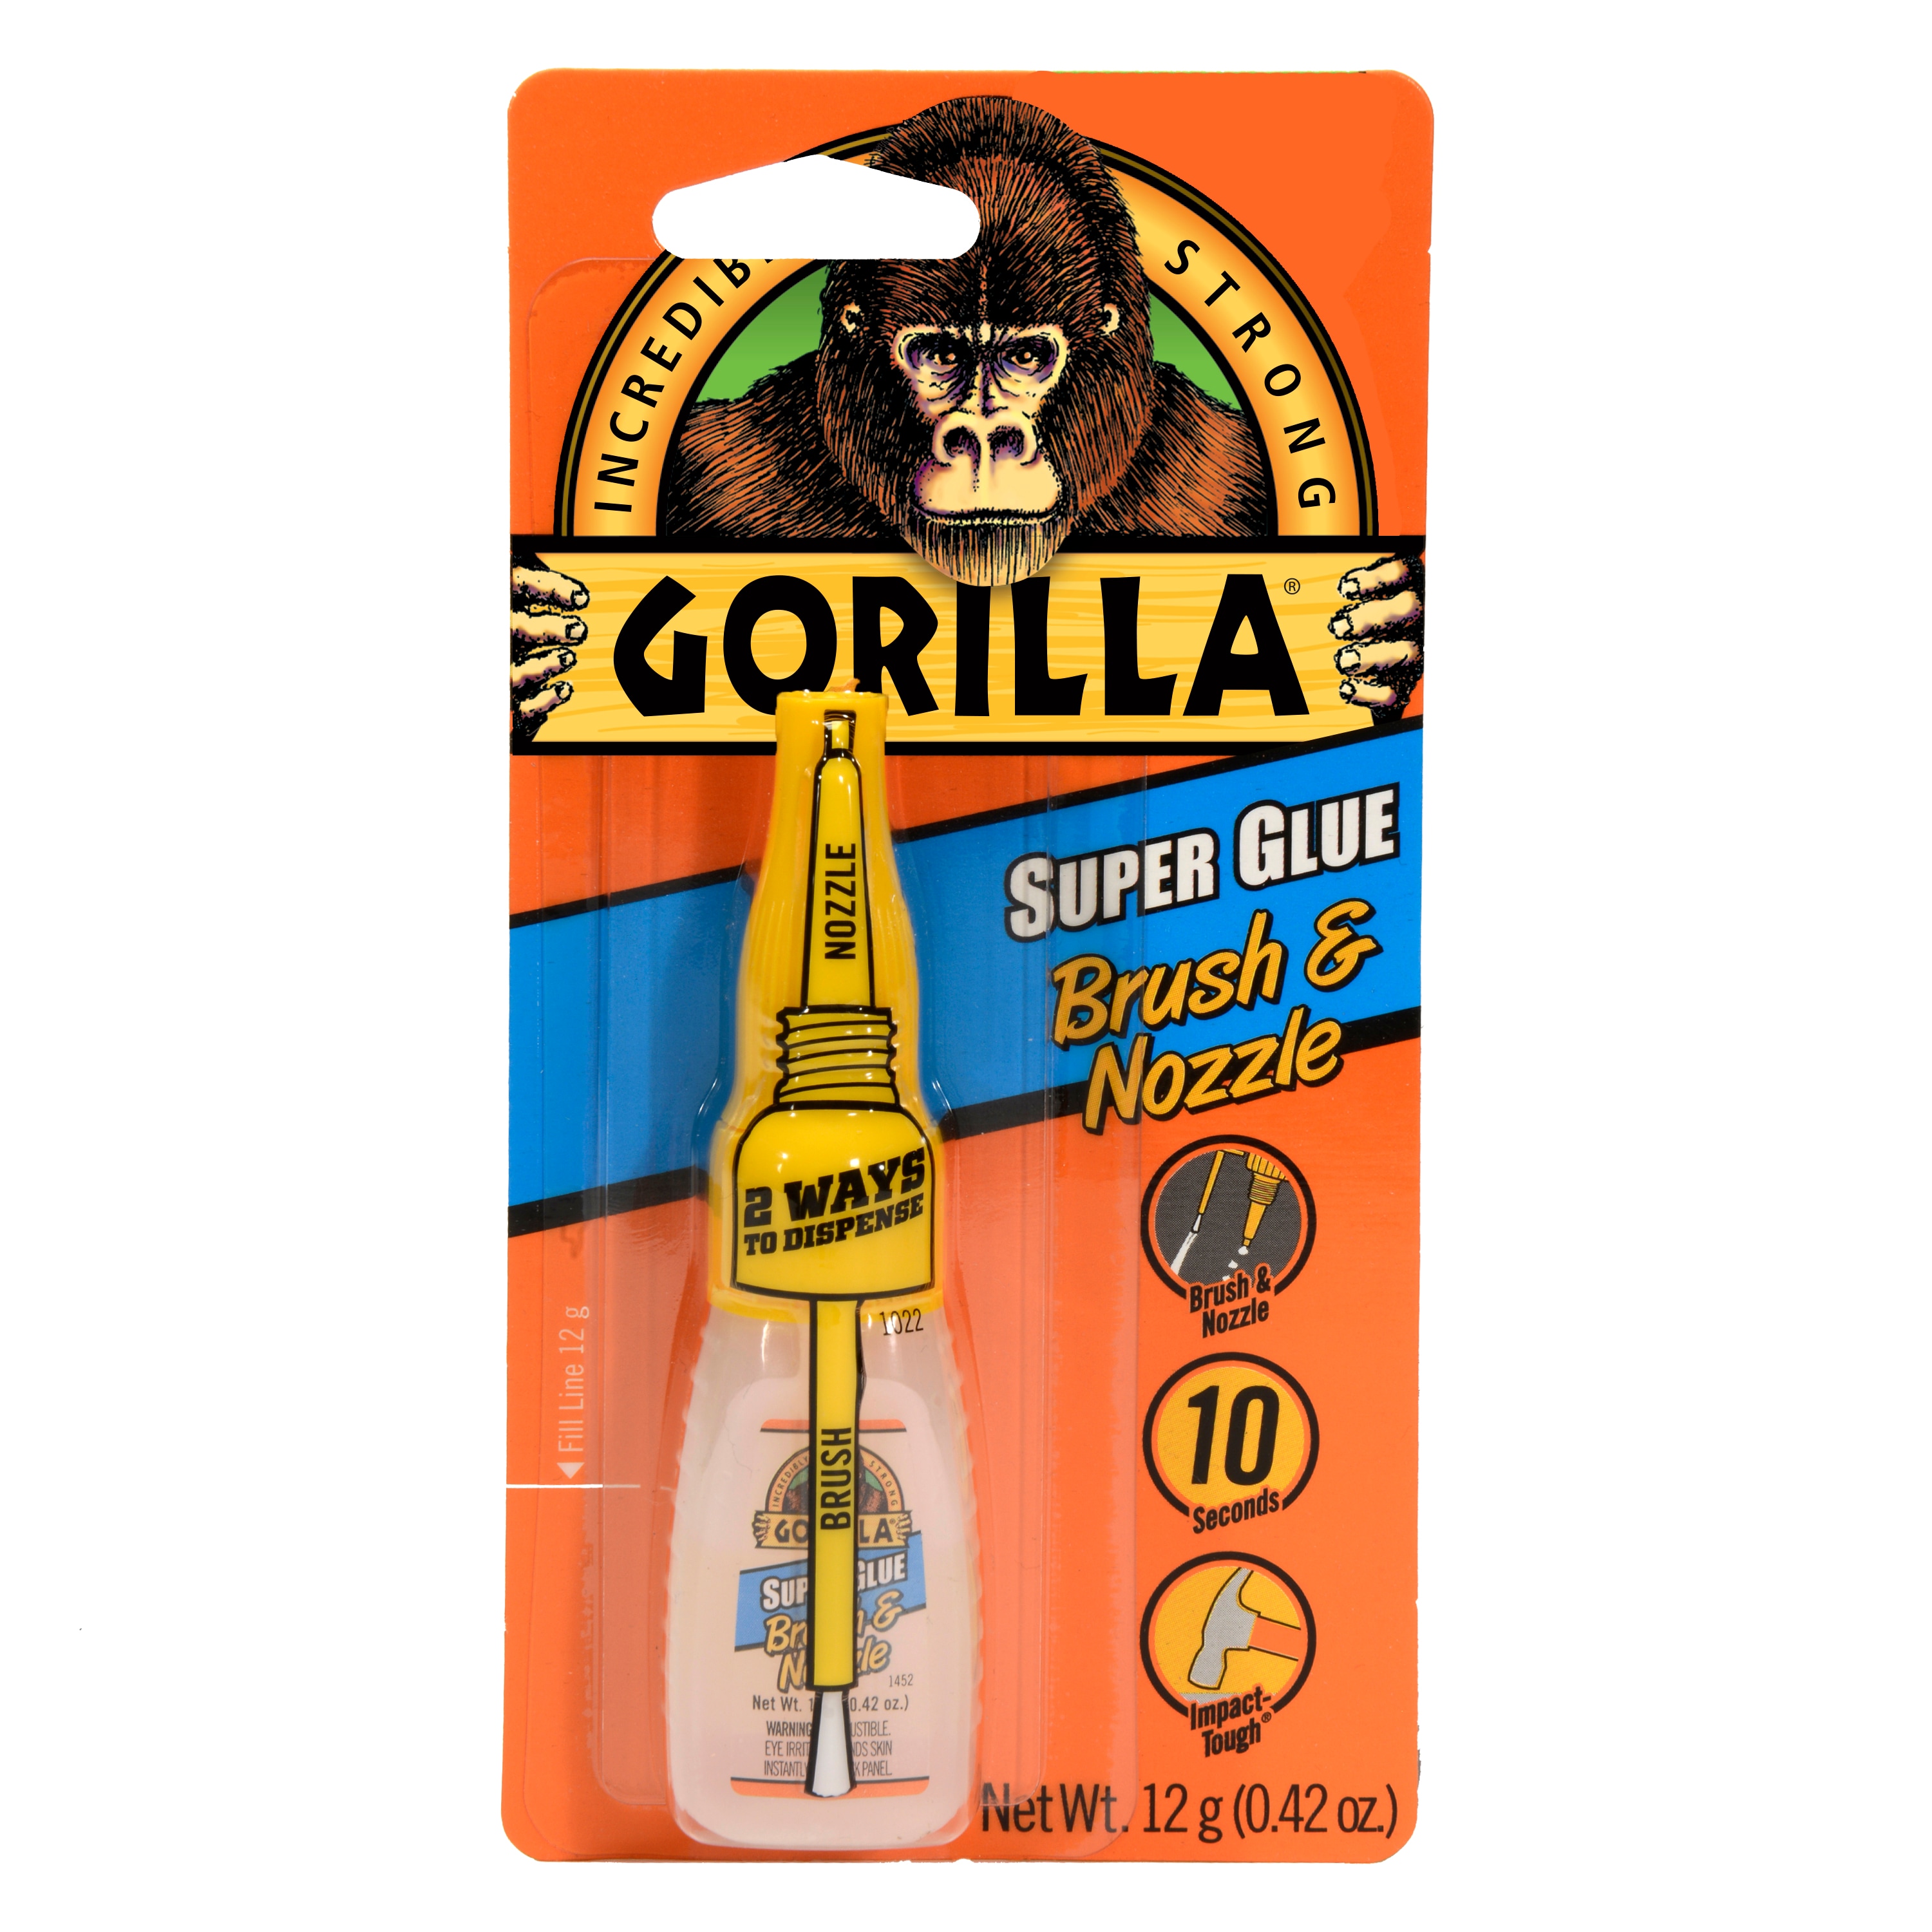 Gorilla Rubber Cement with Brush Applicator, 4 Fl oz, Clear, (Pack of 2) 